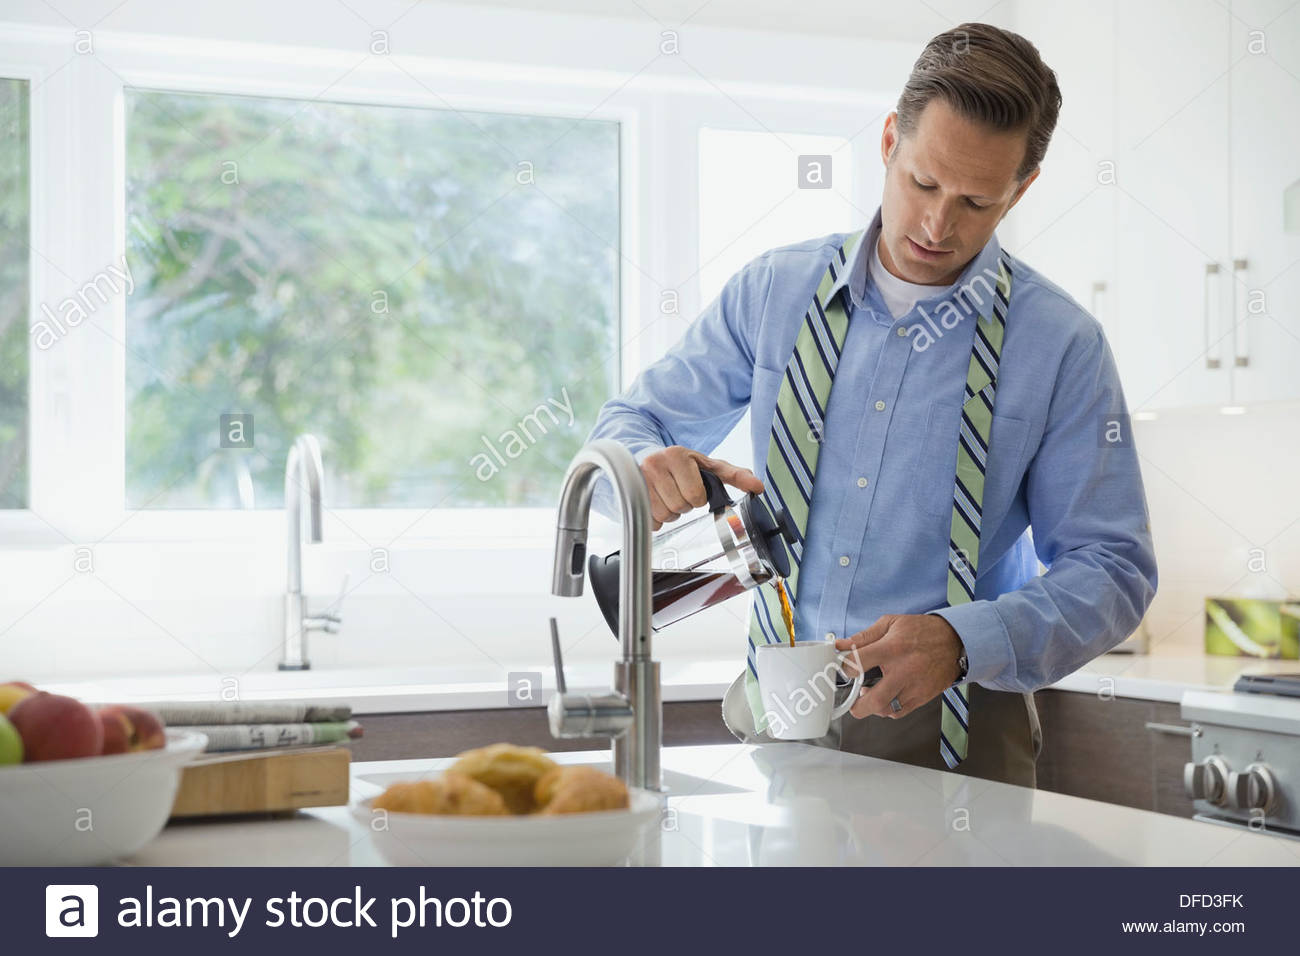 Businessman pouring coffee in domestic kitchen Stock Photo